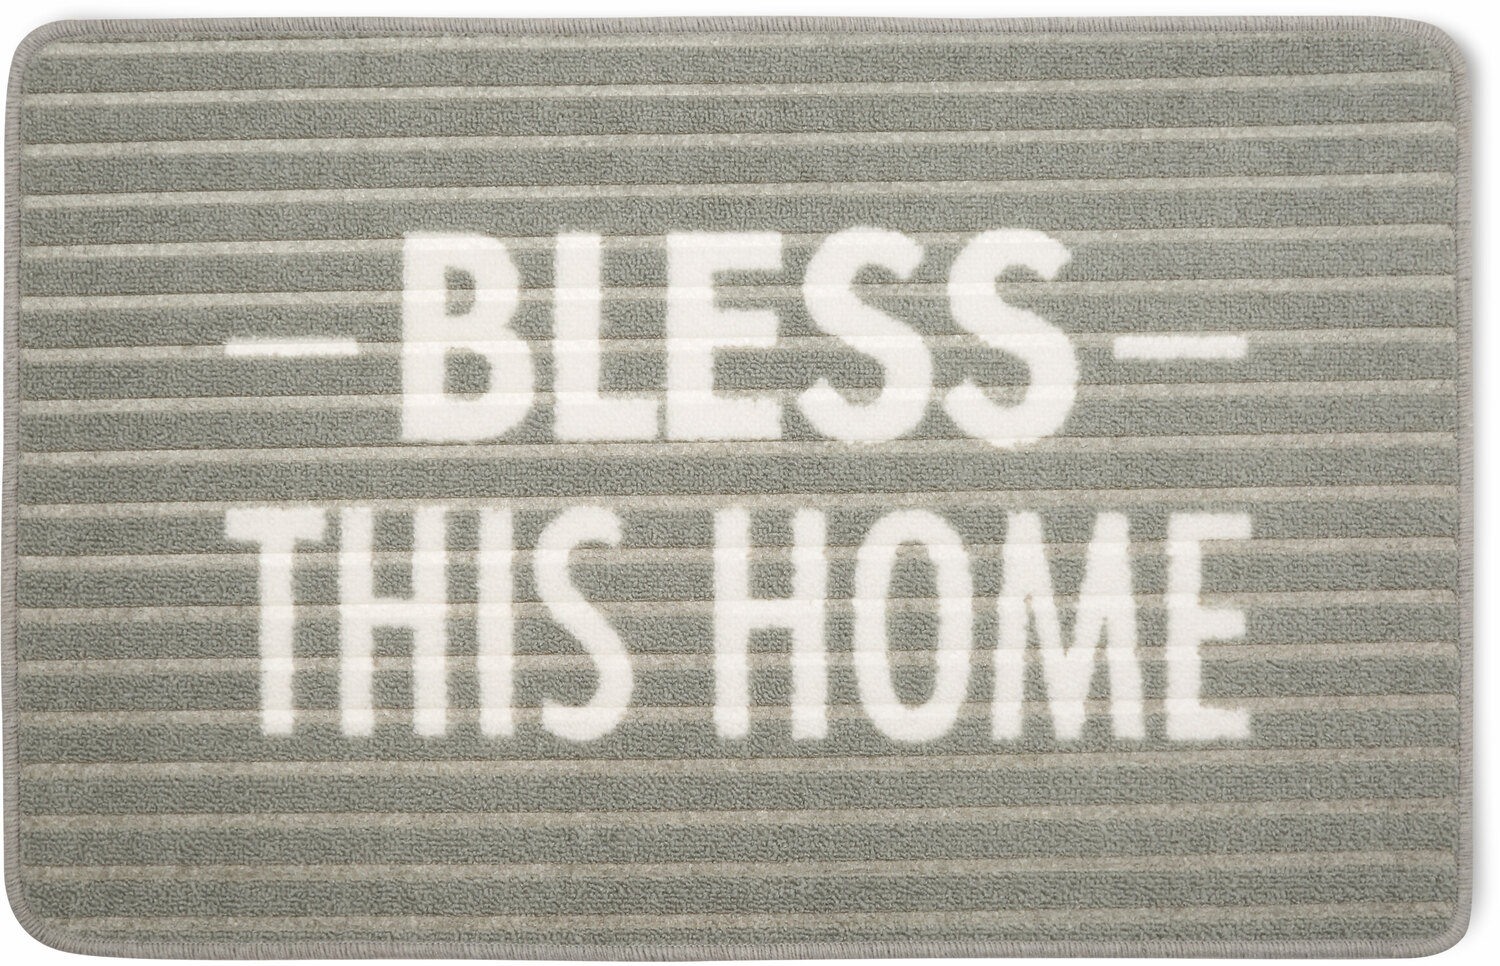 Bless This Home by Open Door Decor - Bless This Home - 27.5" x 17.75" Floor Mat